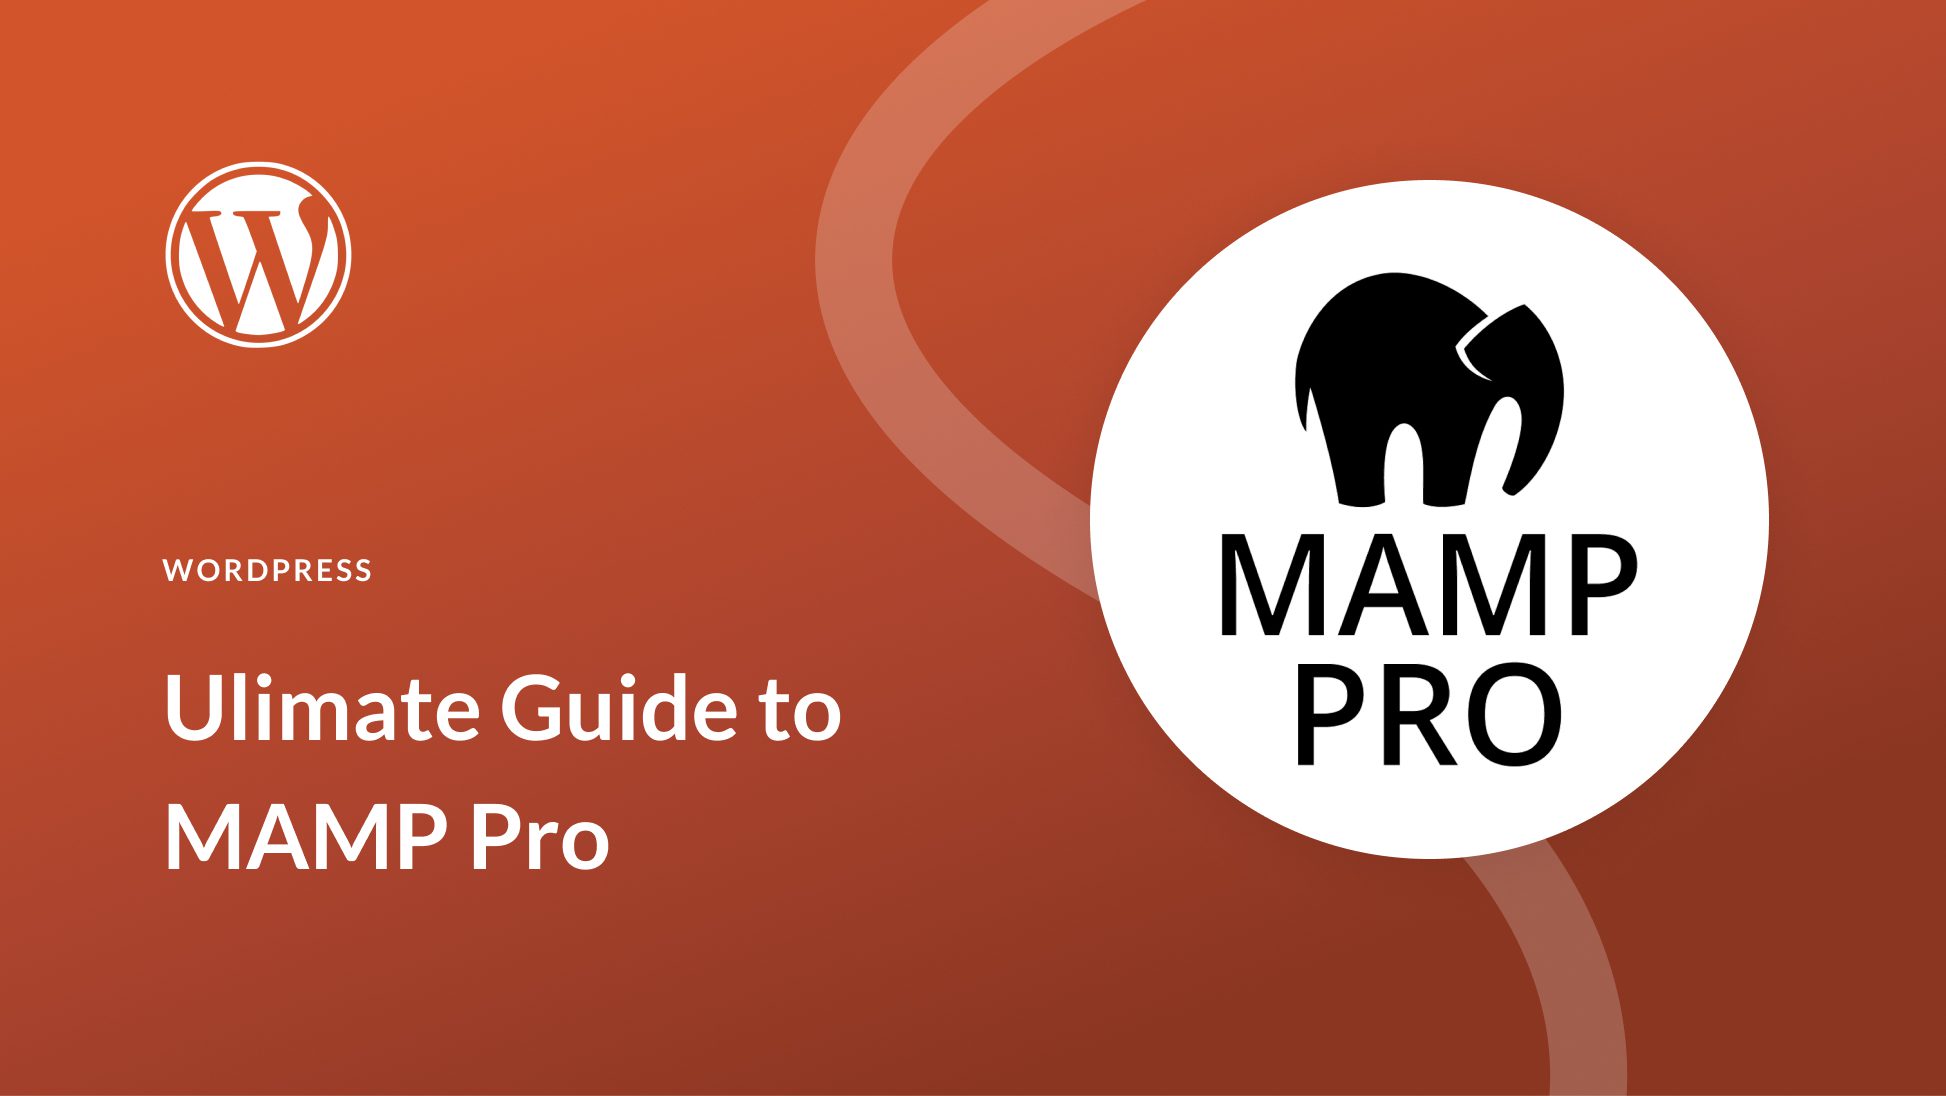 Ultimate Guide to MAMP Pro for WordPress Users